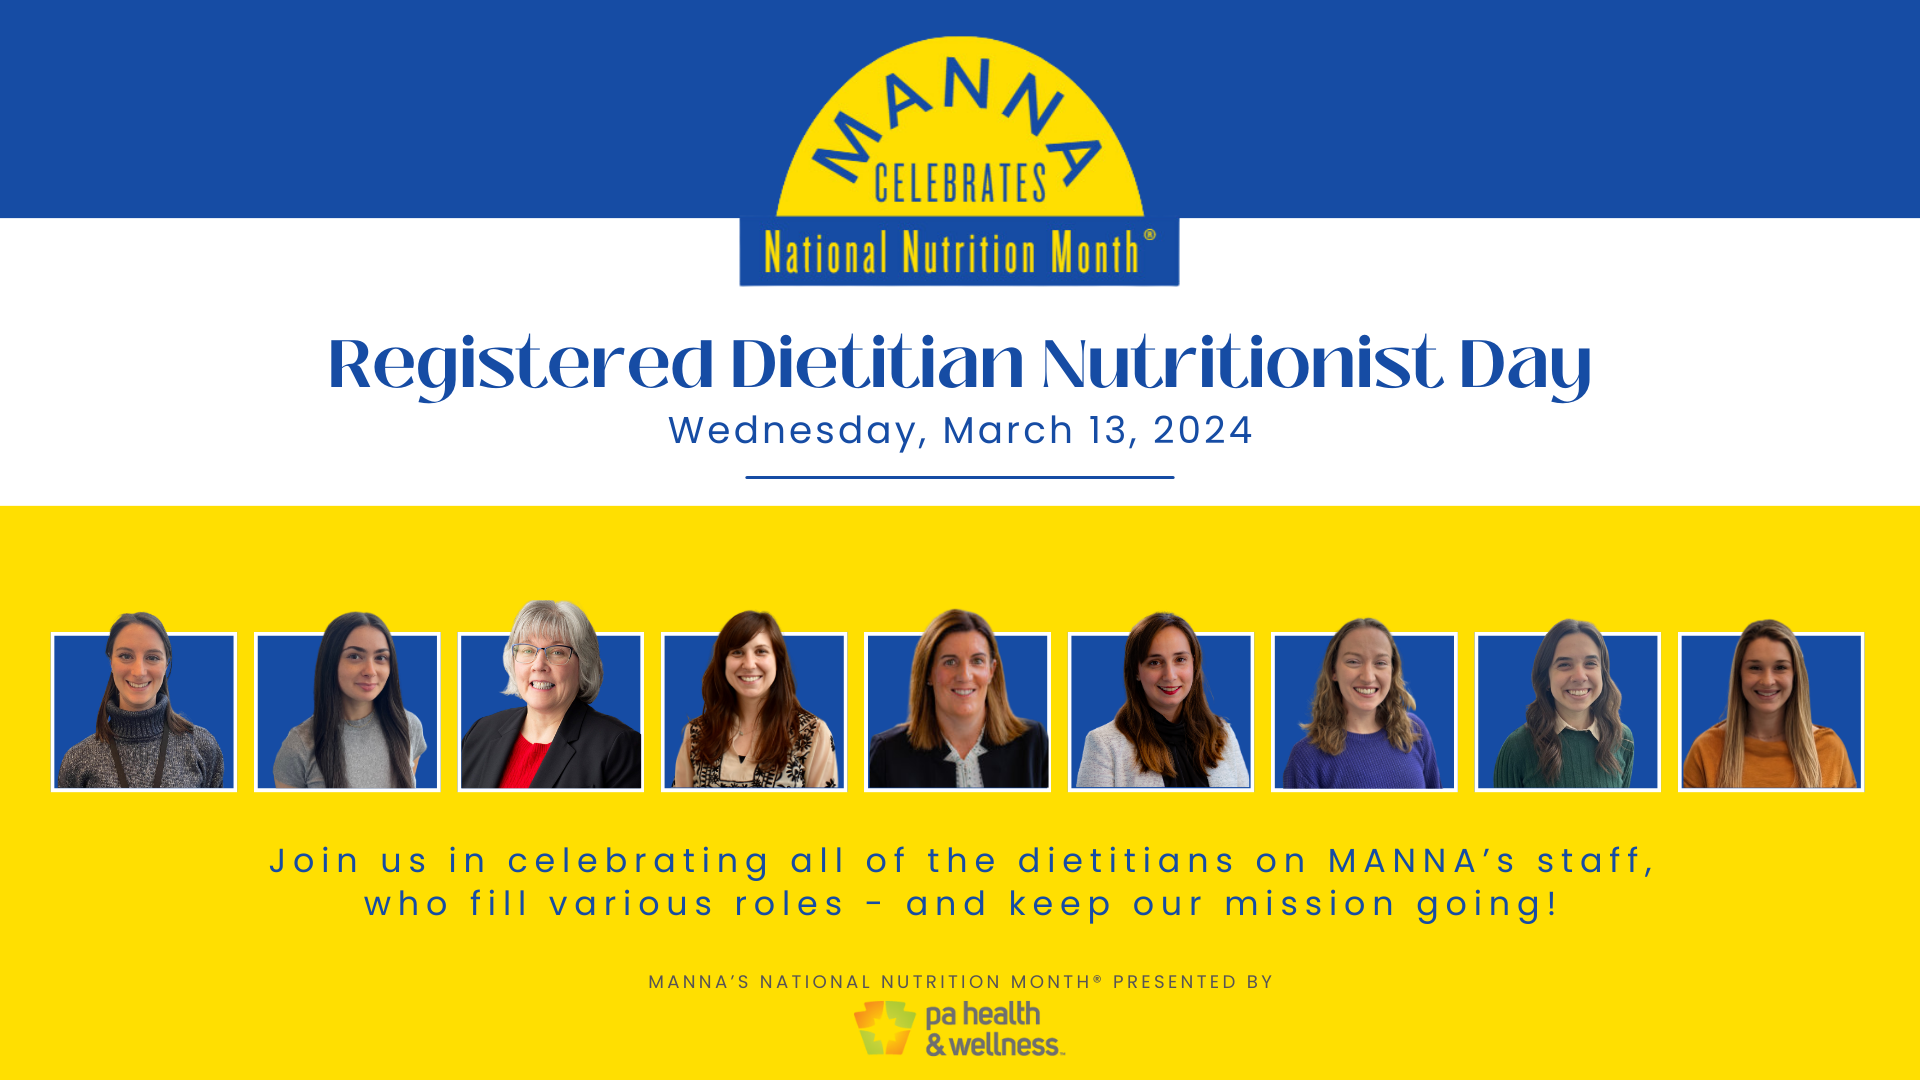 Highlighting the Registered Dietitian-Nutritionists of MANNA